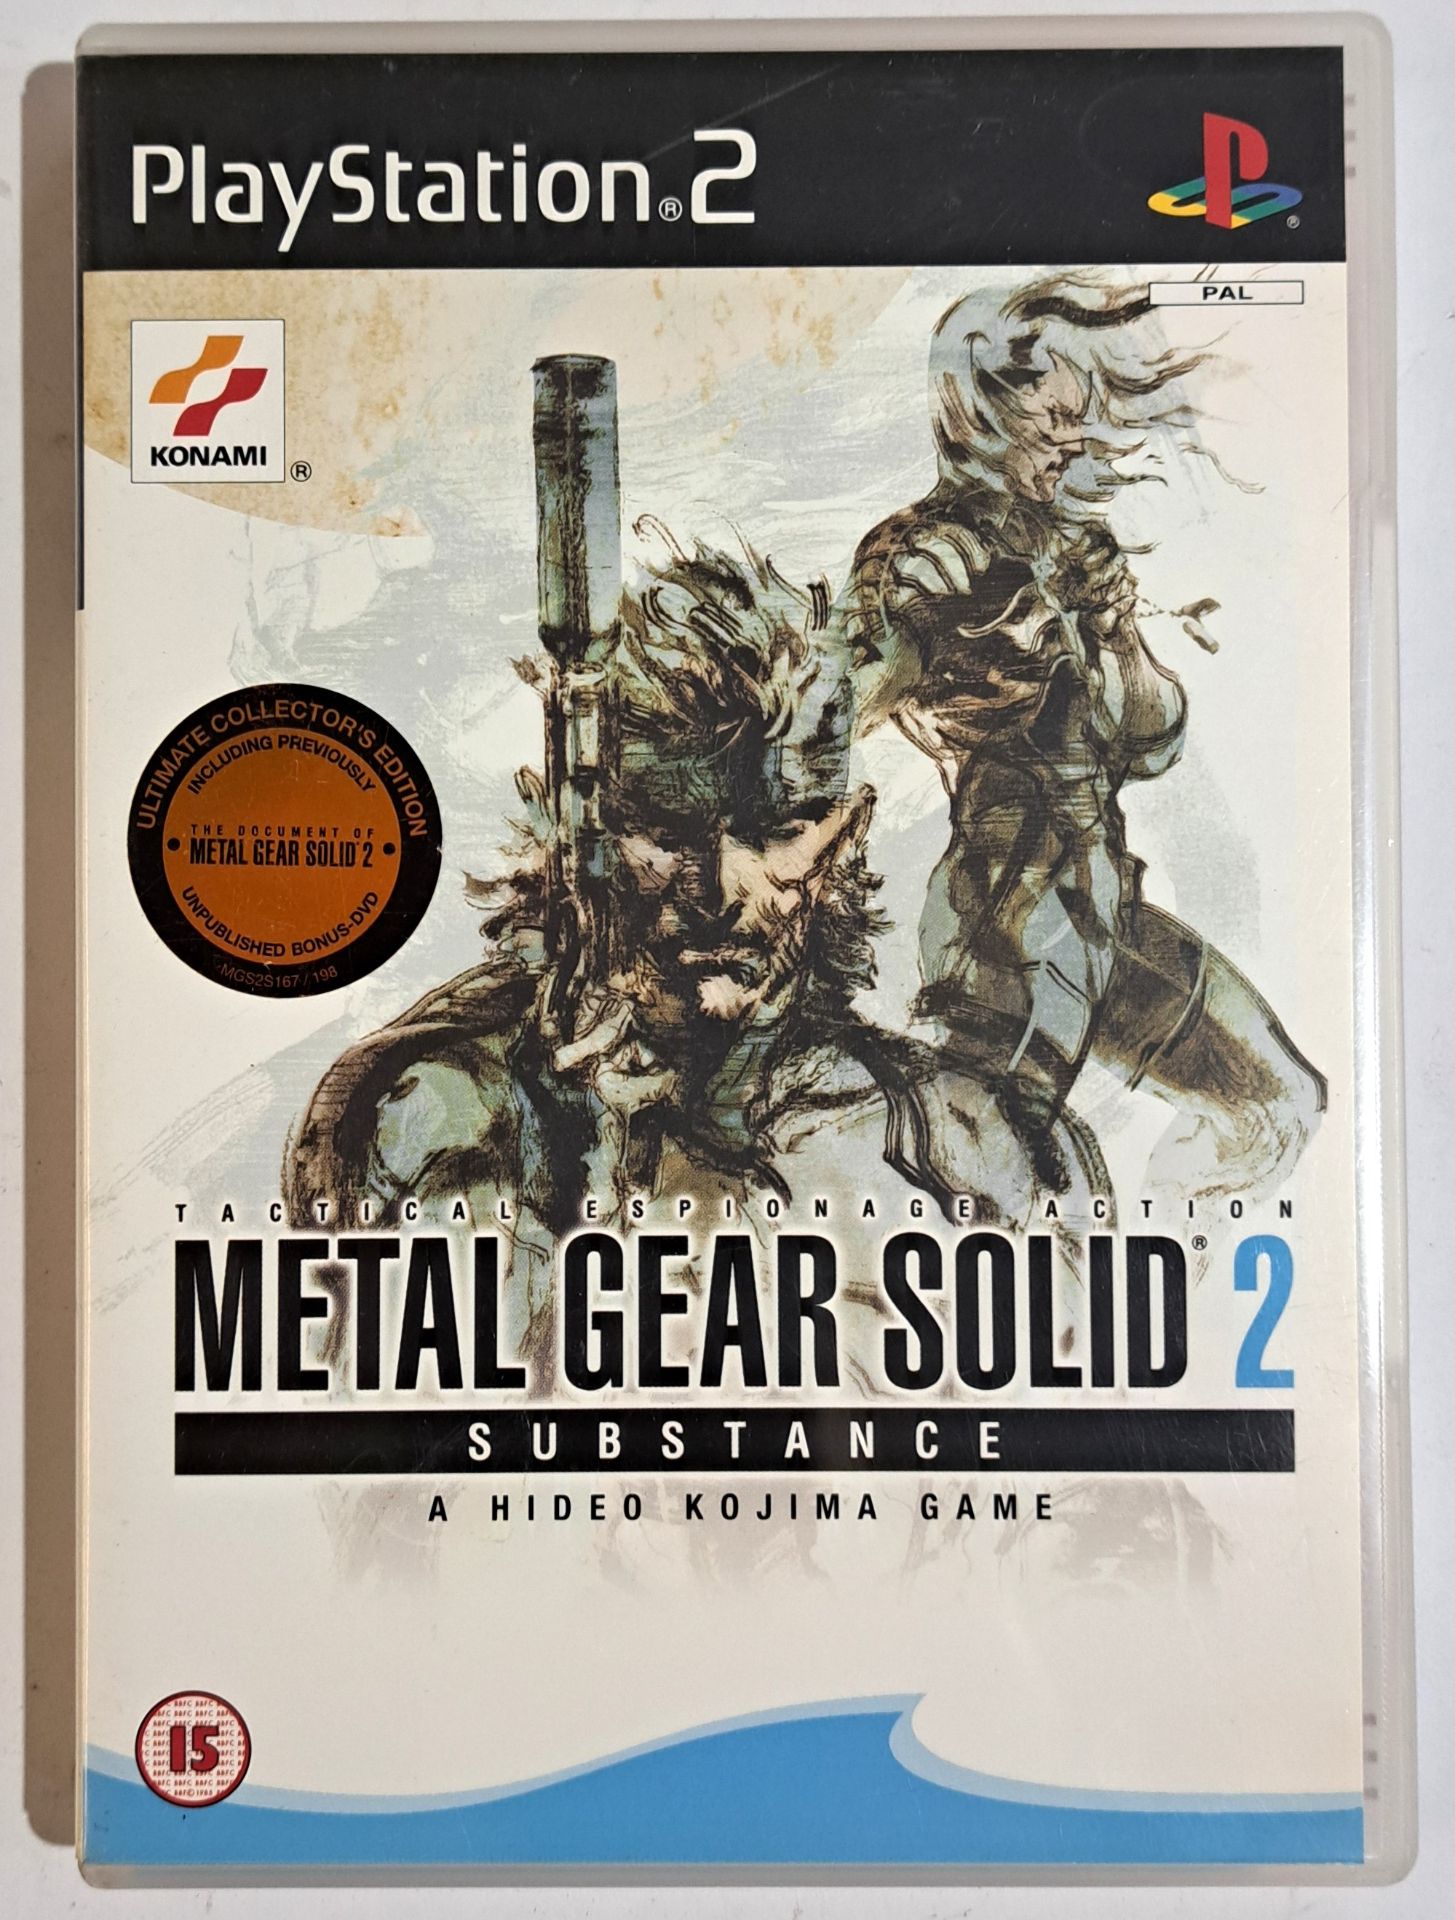 Vintage/Retro Gaming. A boxed PlayStation 2 Game "Metal Gear Solid 2"